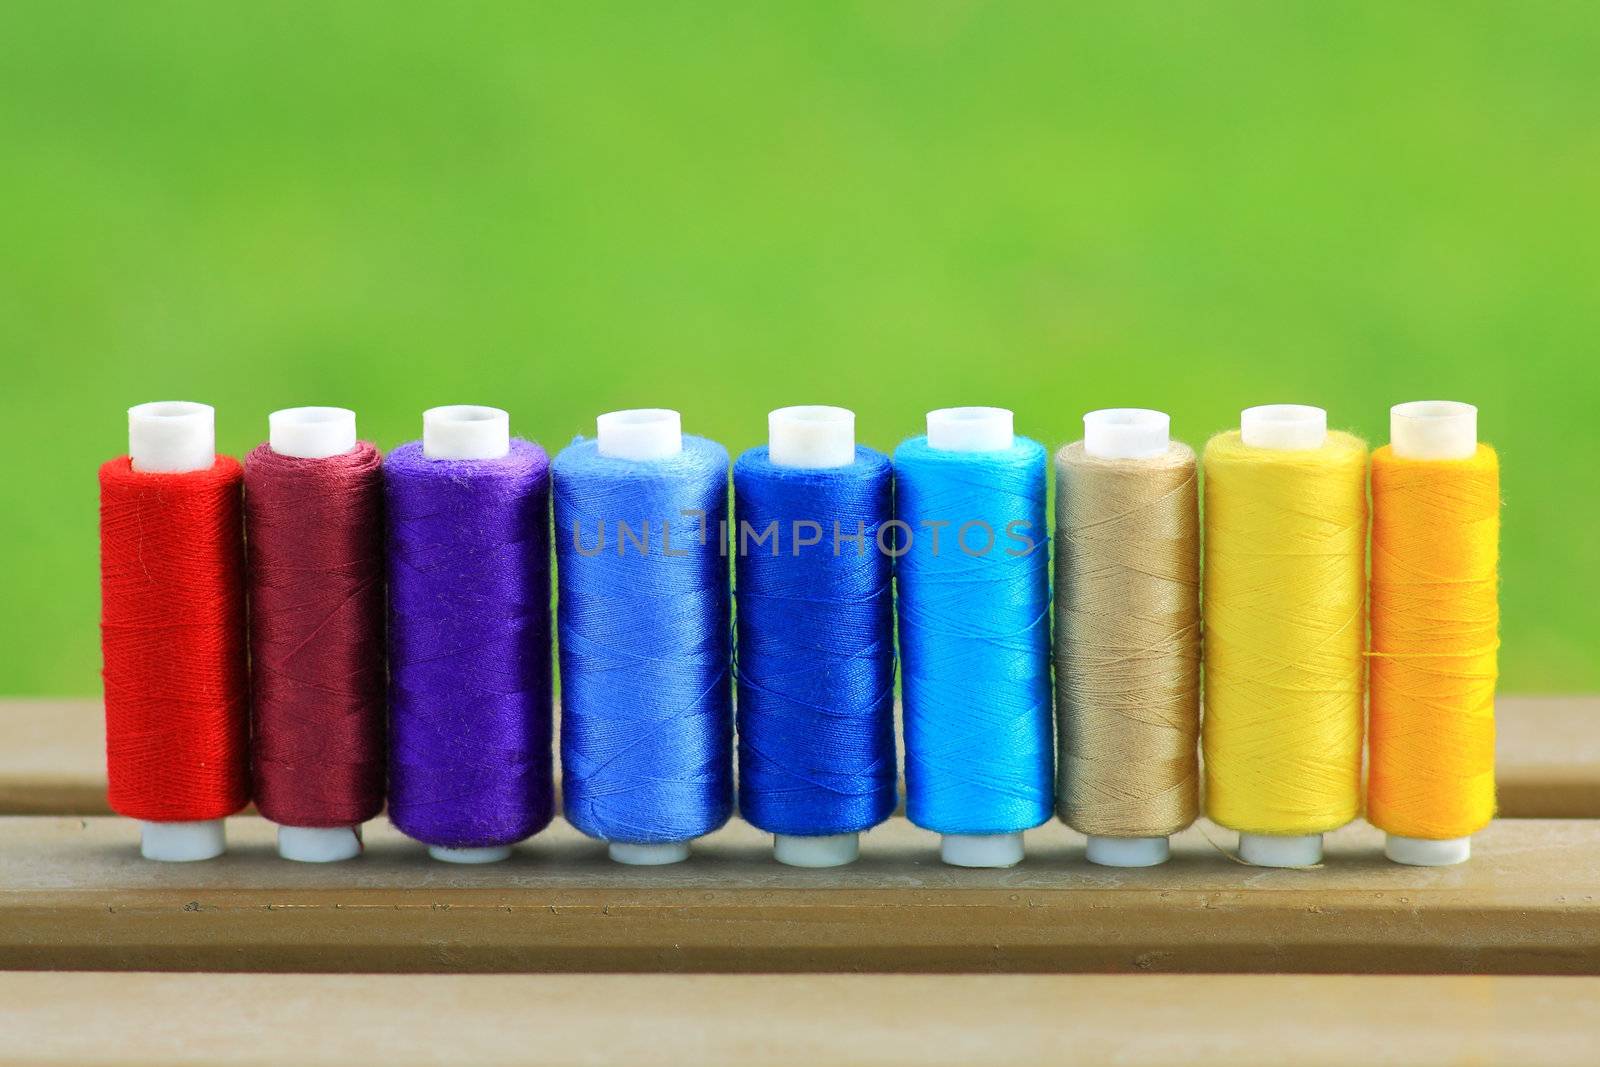 Many colorful spools of thread in a row